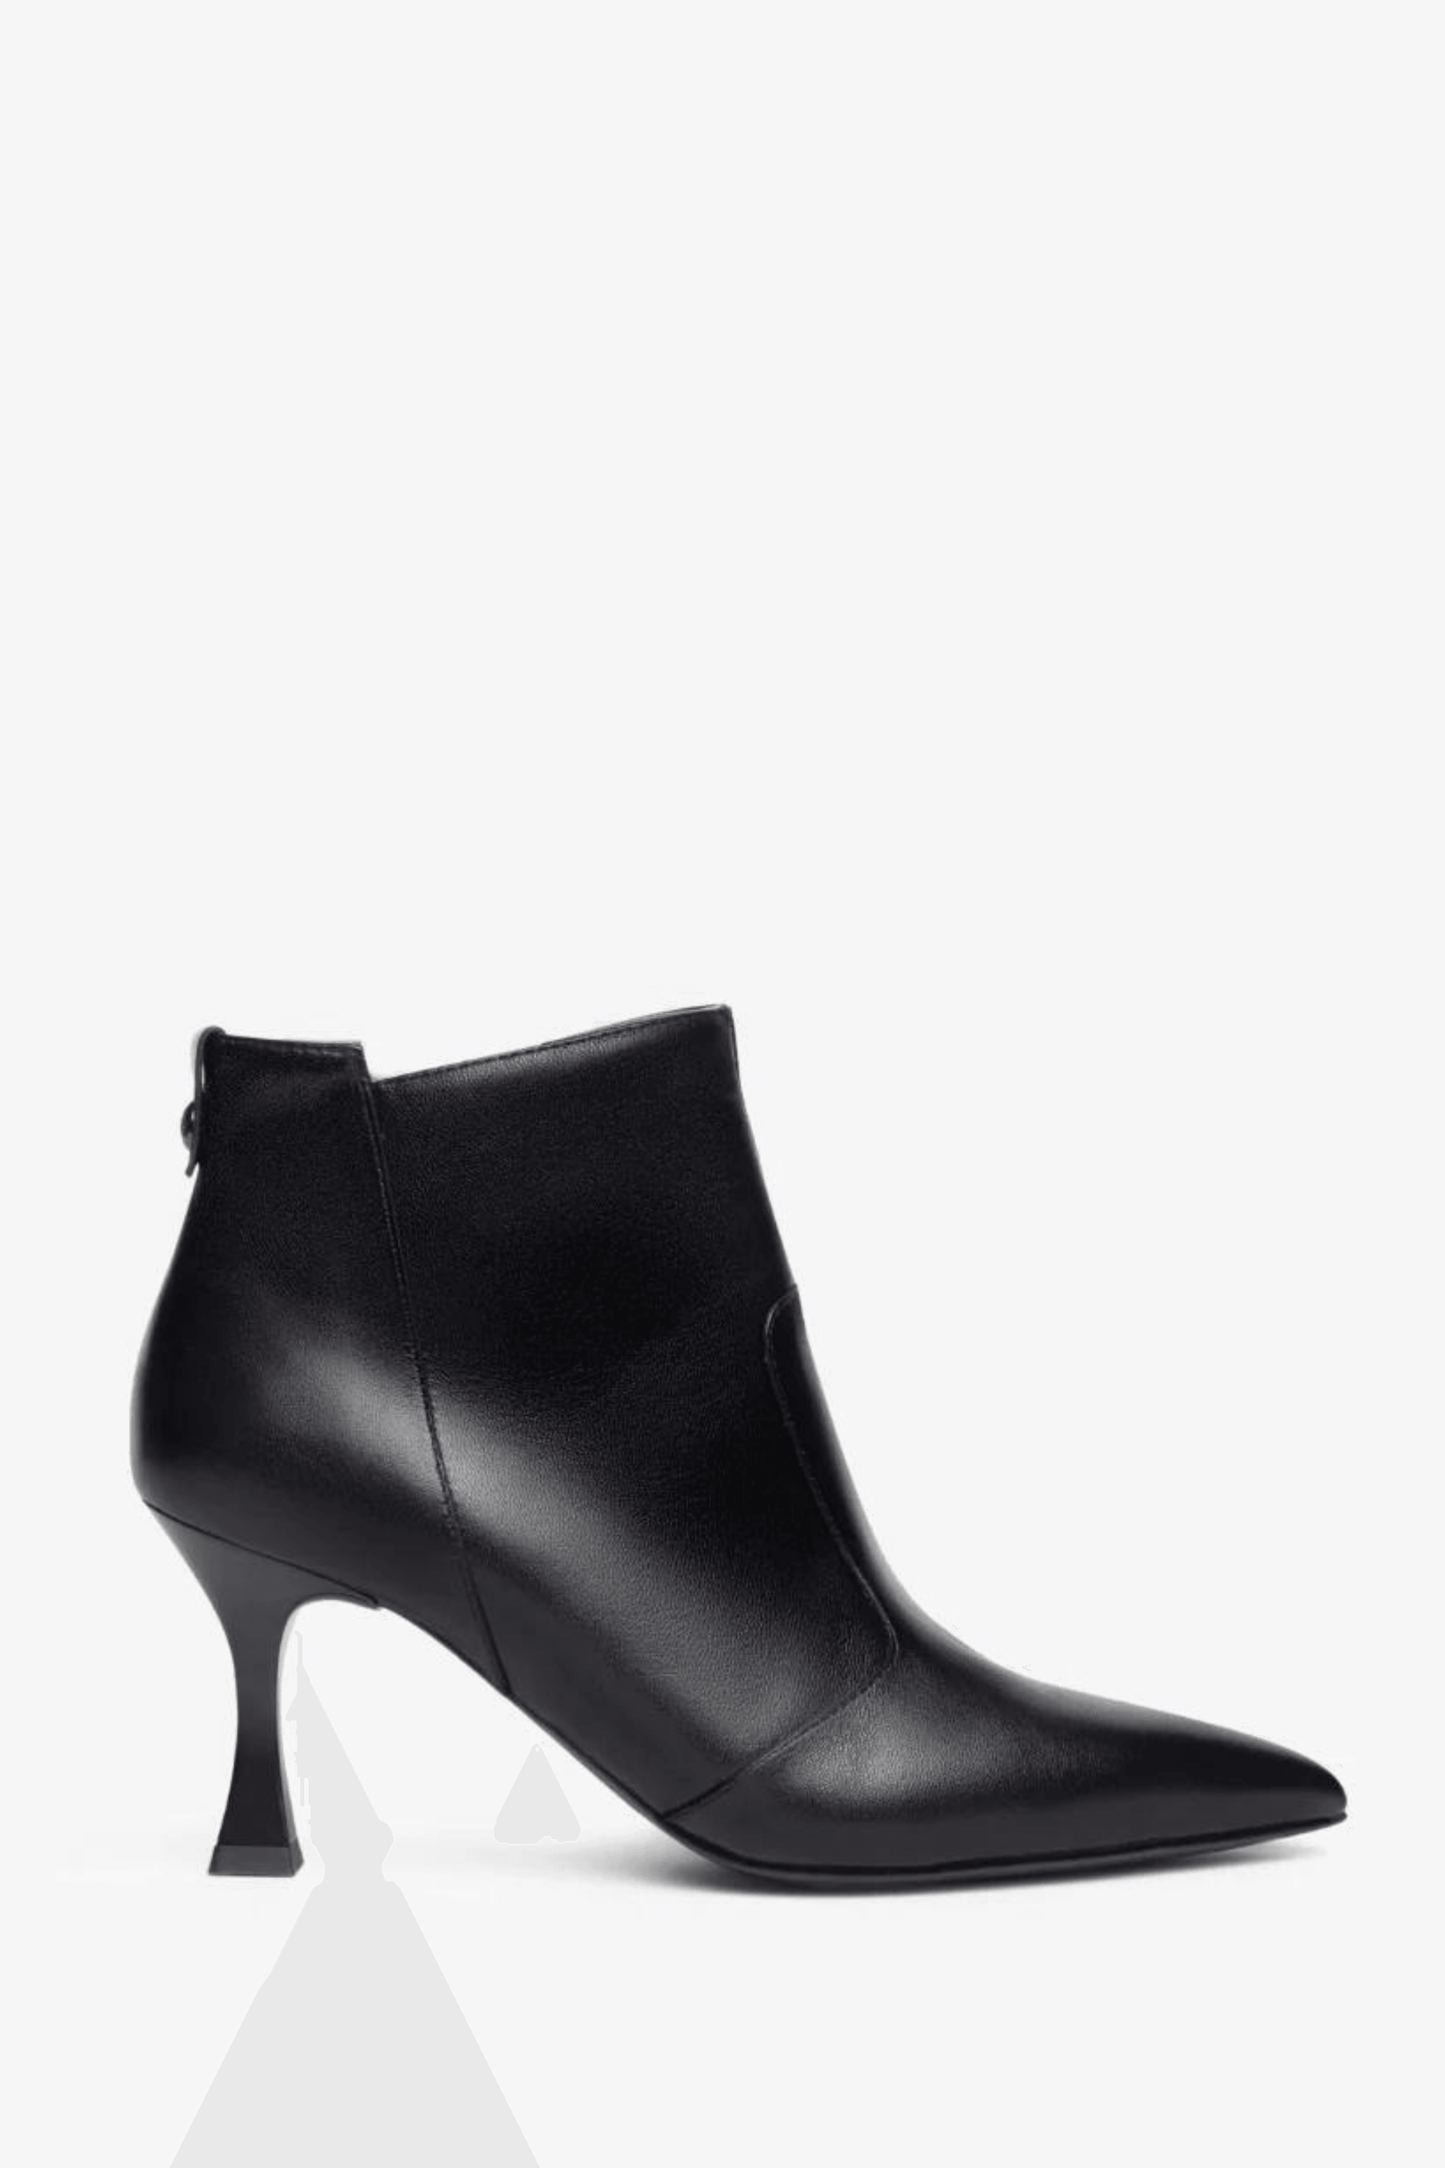 Black Leather Heeled Ankle Boot - Diamonds & Pearls